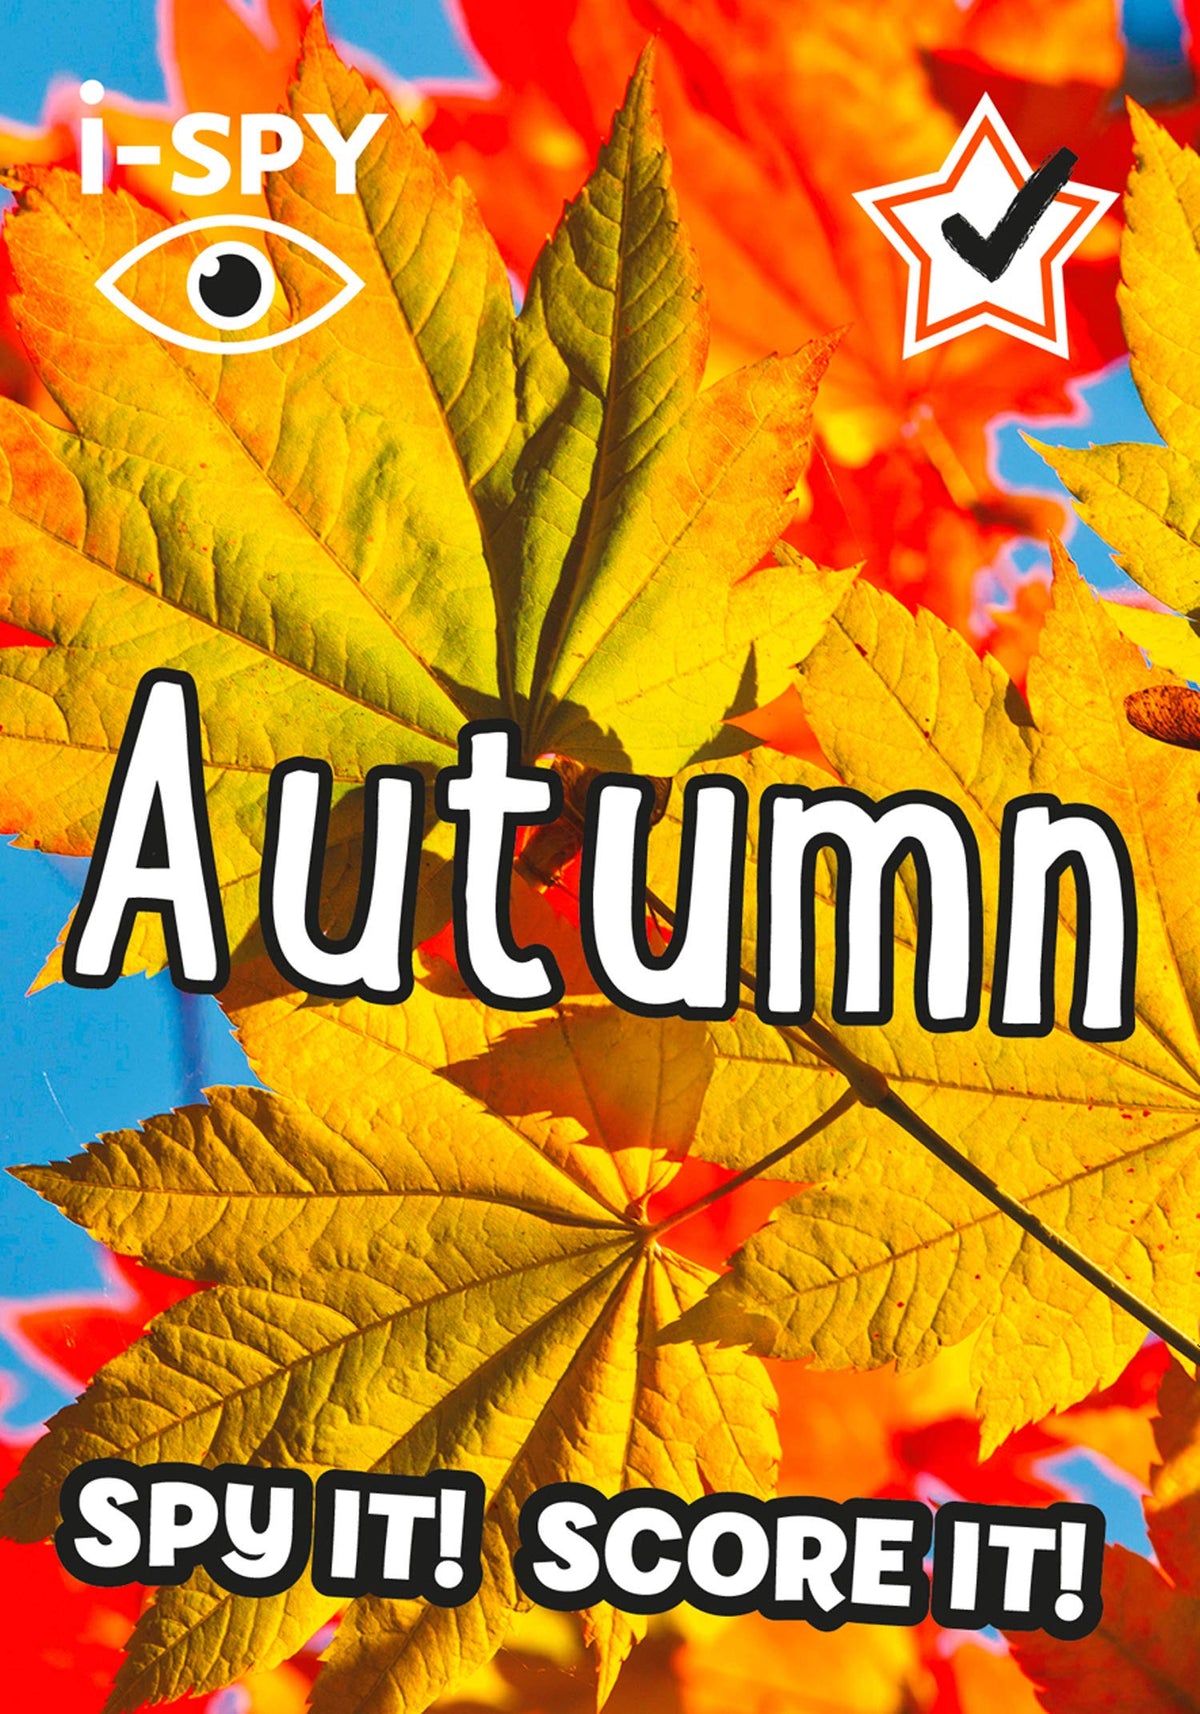 An image of the front cover of the book i-SPY Autumn. It has a brightly coloured yellow and orange cover featuring leaves from a tree against a blue sky.